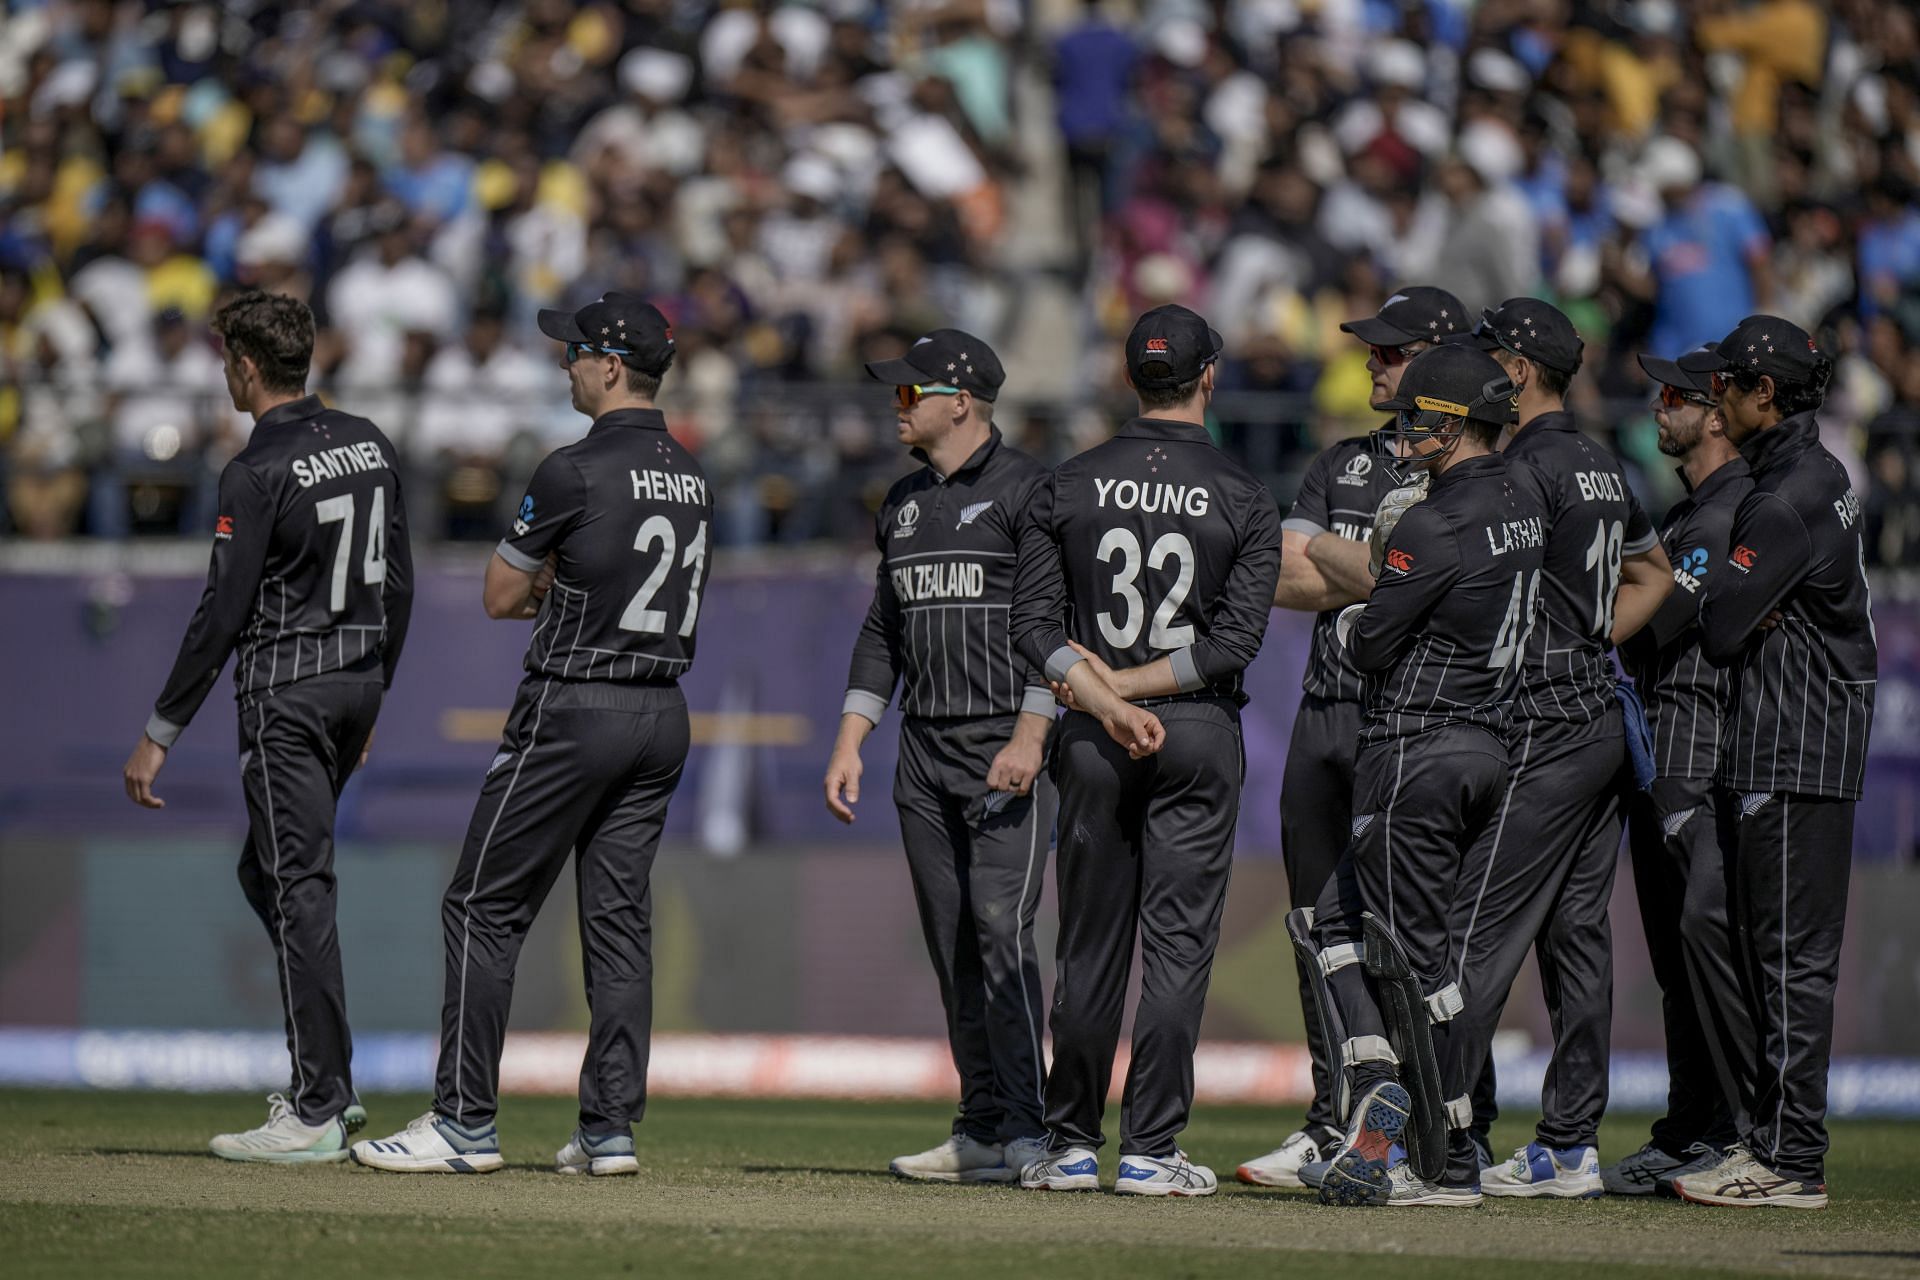 New Zealand have suffered defeats in their last two matches. [P/C: AP]